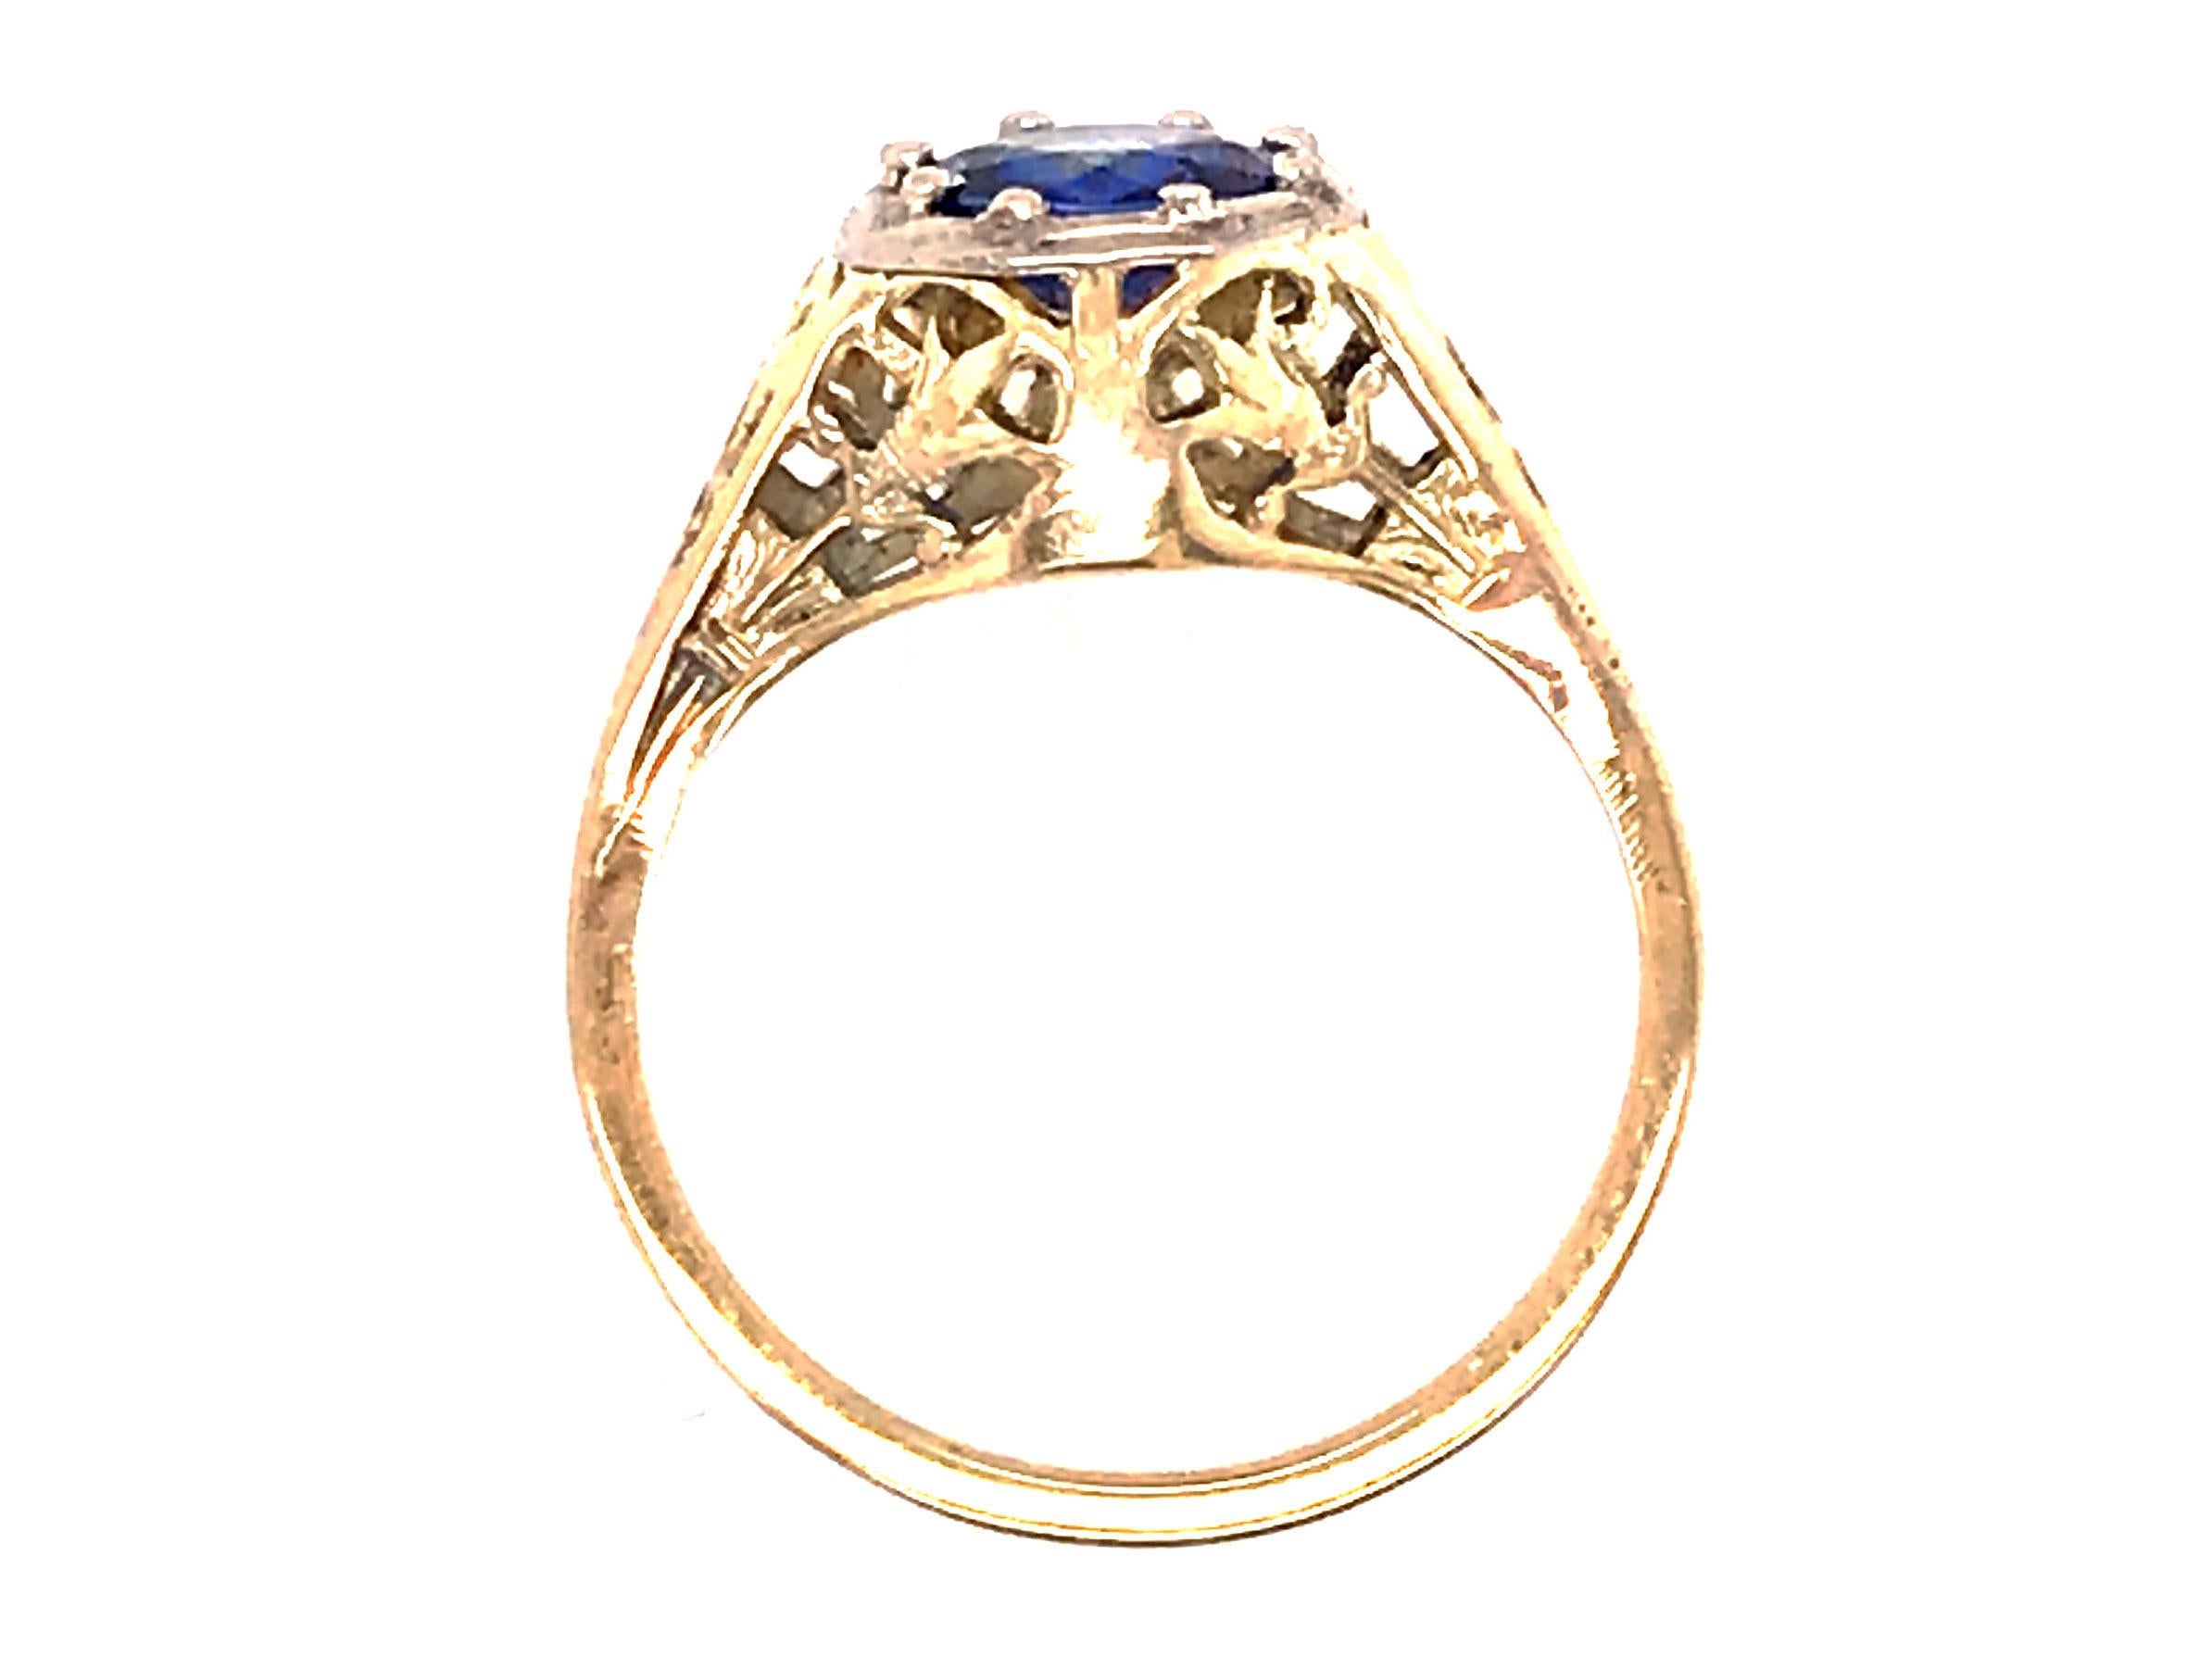 Genuine Original Antique from 1920's-1930's 1.15ct Sapphire 14K Yellow Gold Vintage Art Deco Cocktail Ring



Featuring a Stunning 1.15ct Genuine Natural Sapphire

Gorgeous Hand Carved Details

Rare Yellow Gold Ring With White Gold Setting

100%